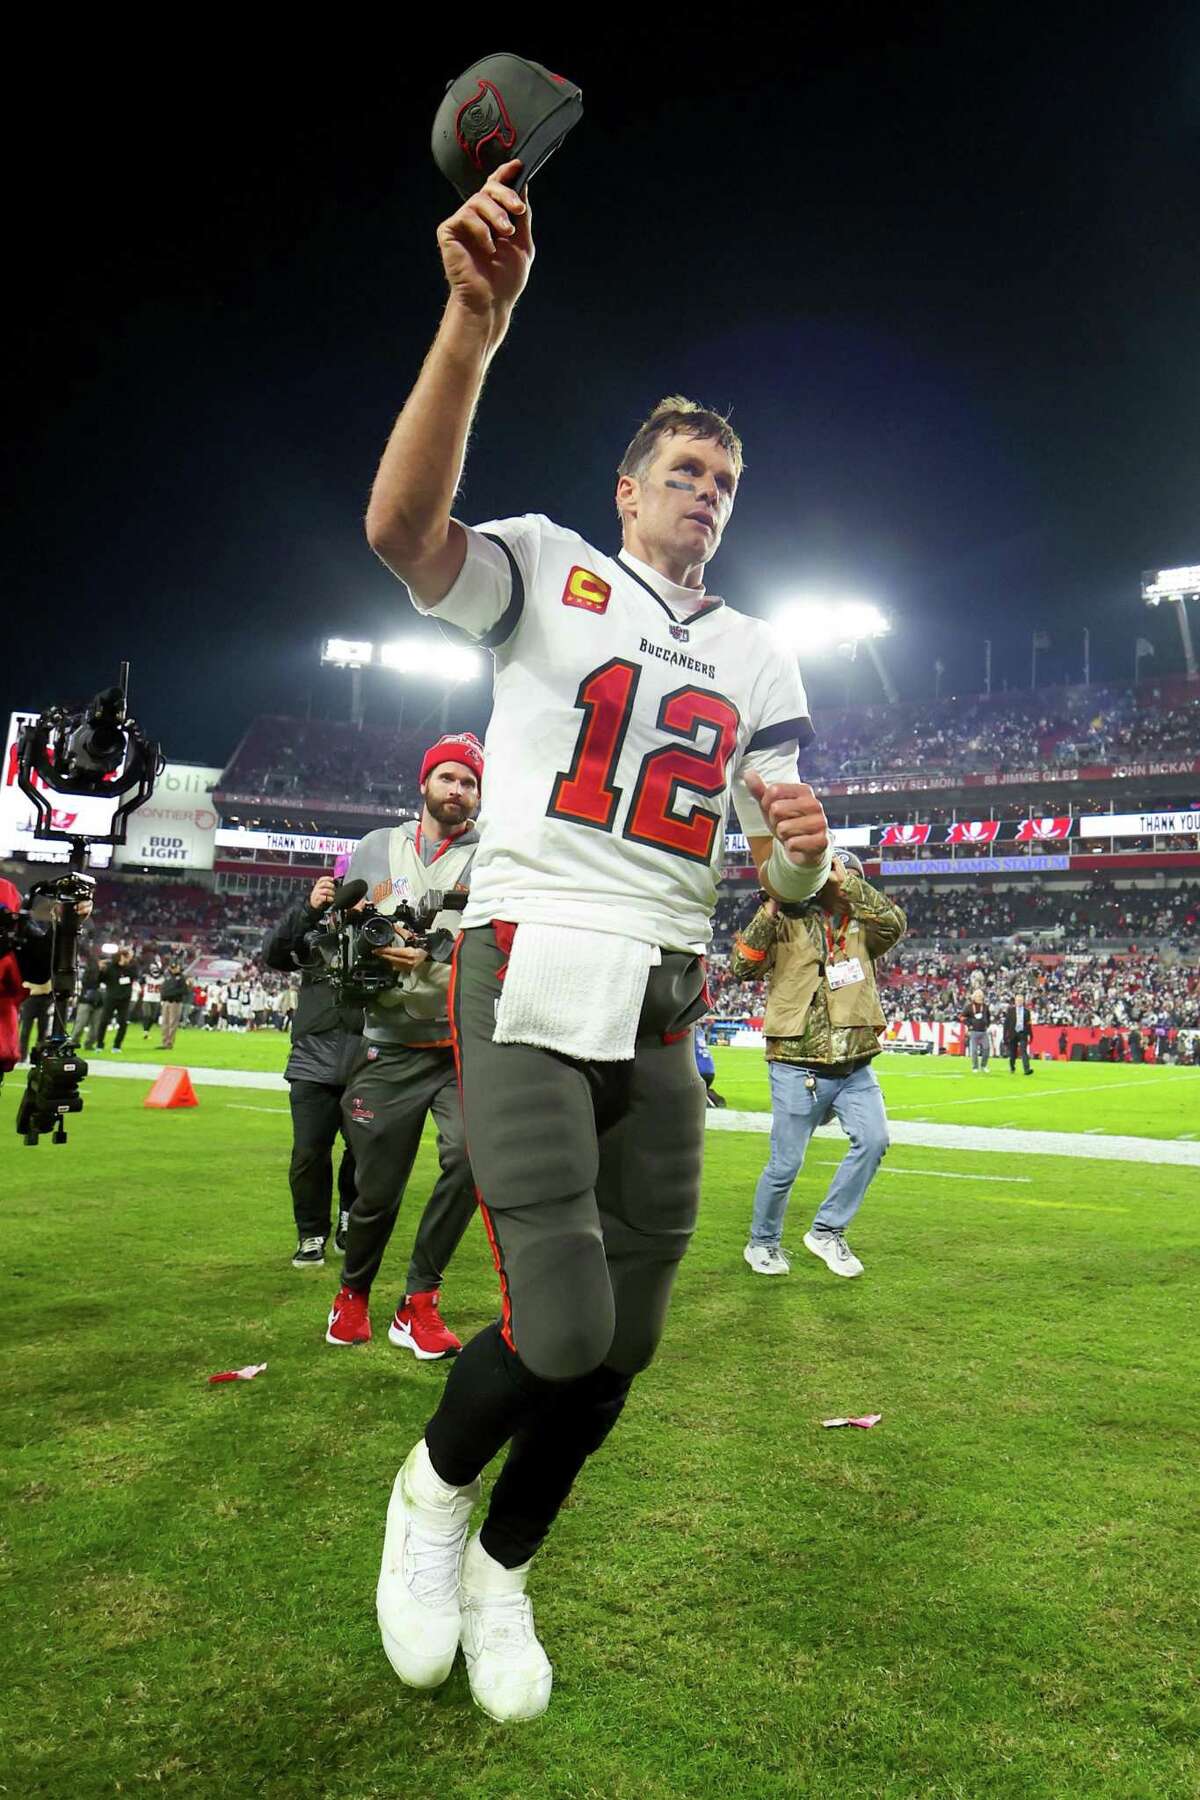 TAMPA, FLORIDA - JANUARY 16: Tom Brady #12 of the Tampa Bay Buccaneers walks off the field after losing to the Dallas Cowboys 31-14 in the NFC Wild Card playoff game at Raymond James Stadium on January 16, 2023 in Tampa, Florida. (Photo by Mike Ehrmann/Getty Images)